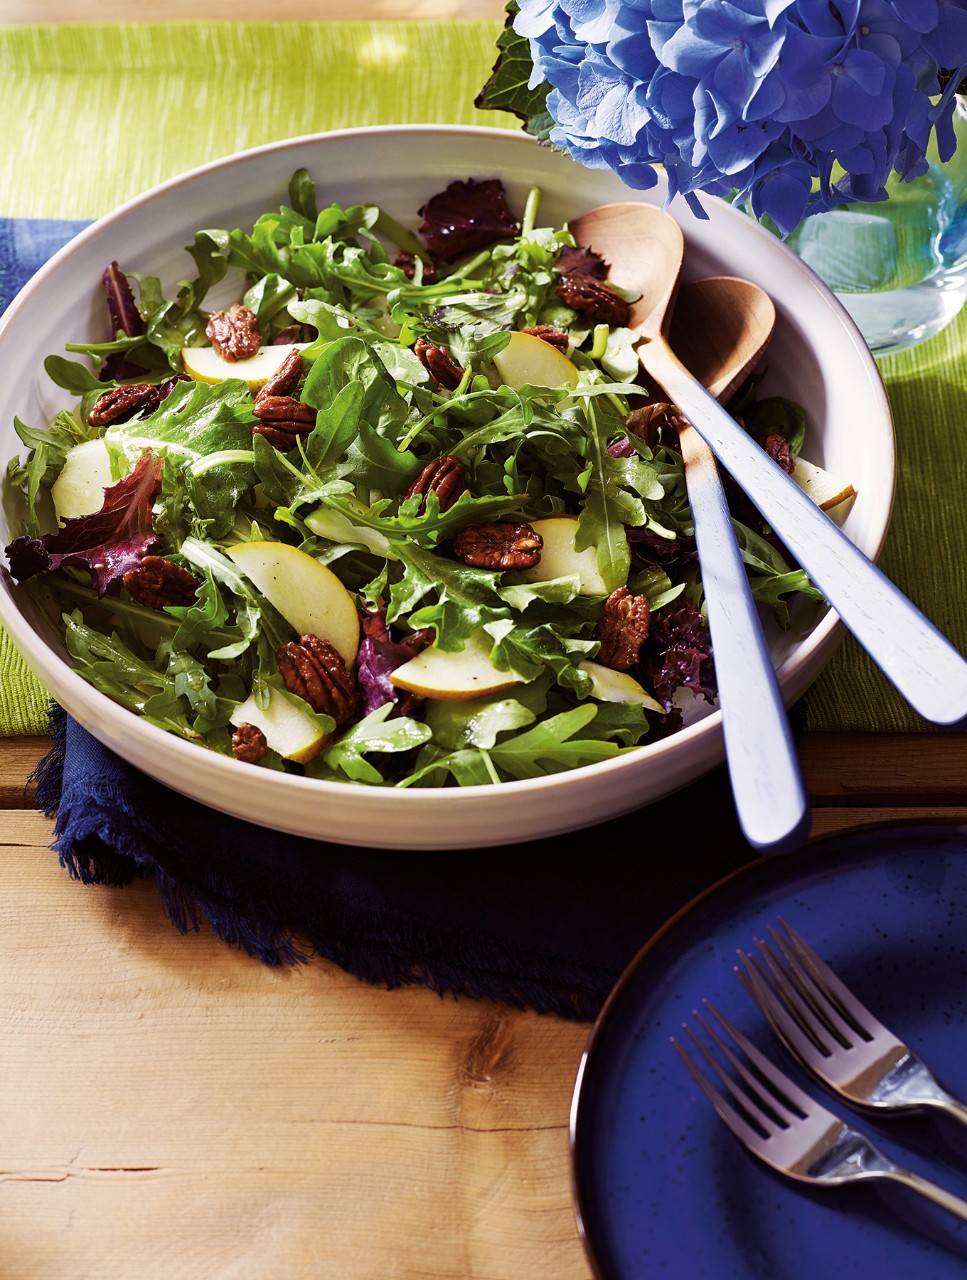 Salad Greens with Sugar Pears & Spiced Pecans